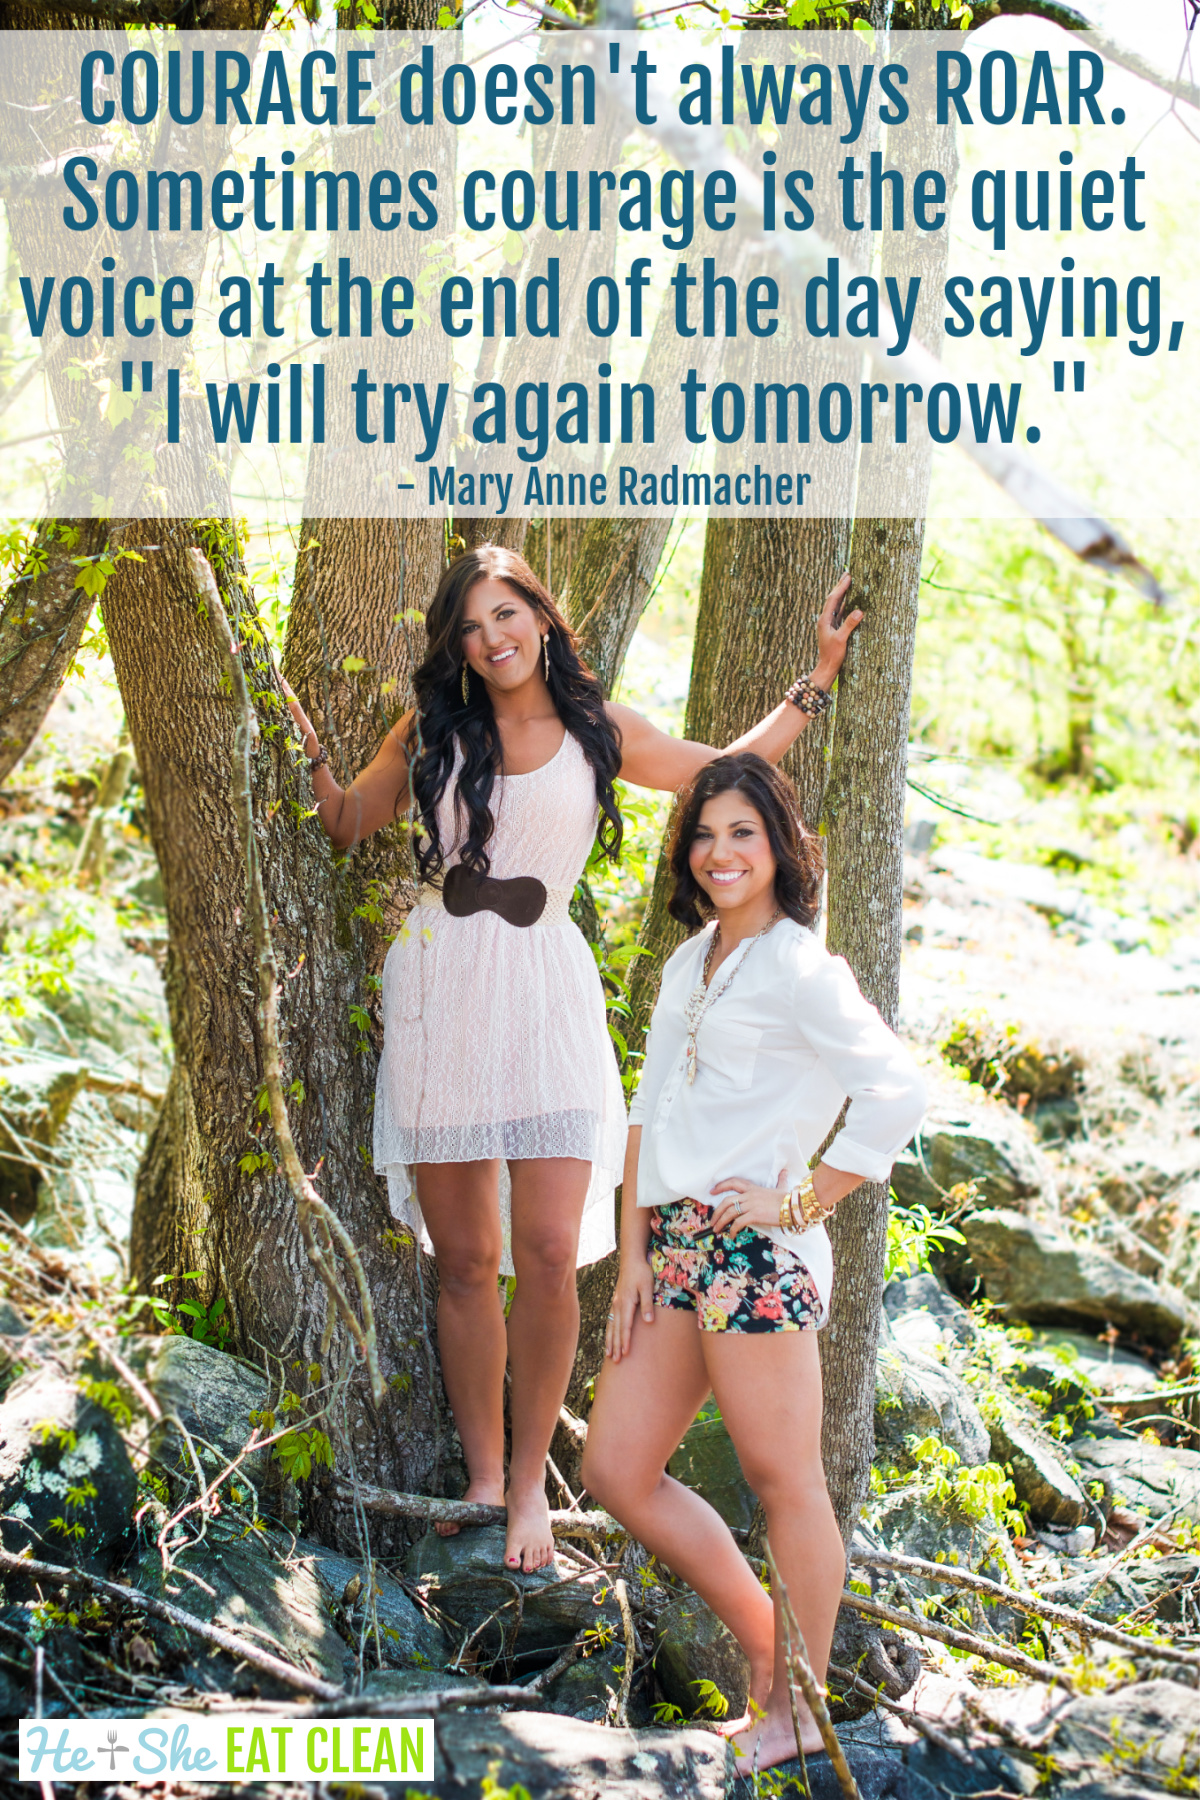 two females posing in a tree. text reads COURAGE doesn't always ROAR. Sometimes courage is the quiet voice at the end of the day saying, "I will try again tomorrow." - Mary Anne Radmacher